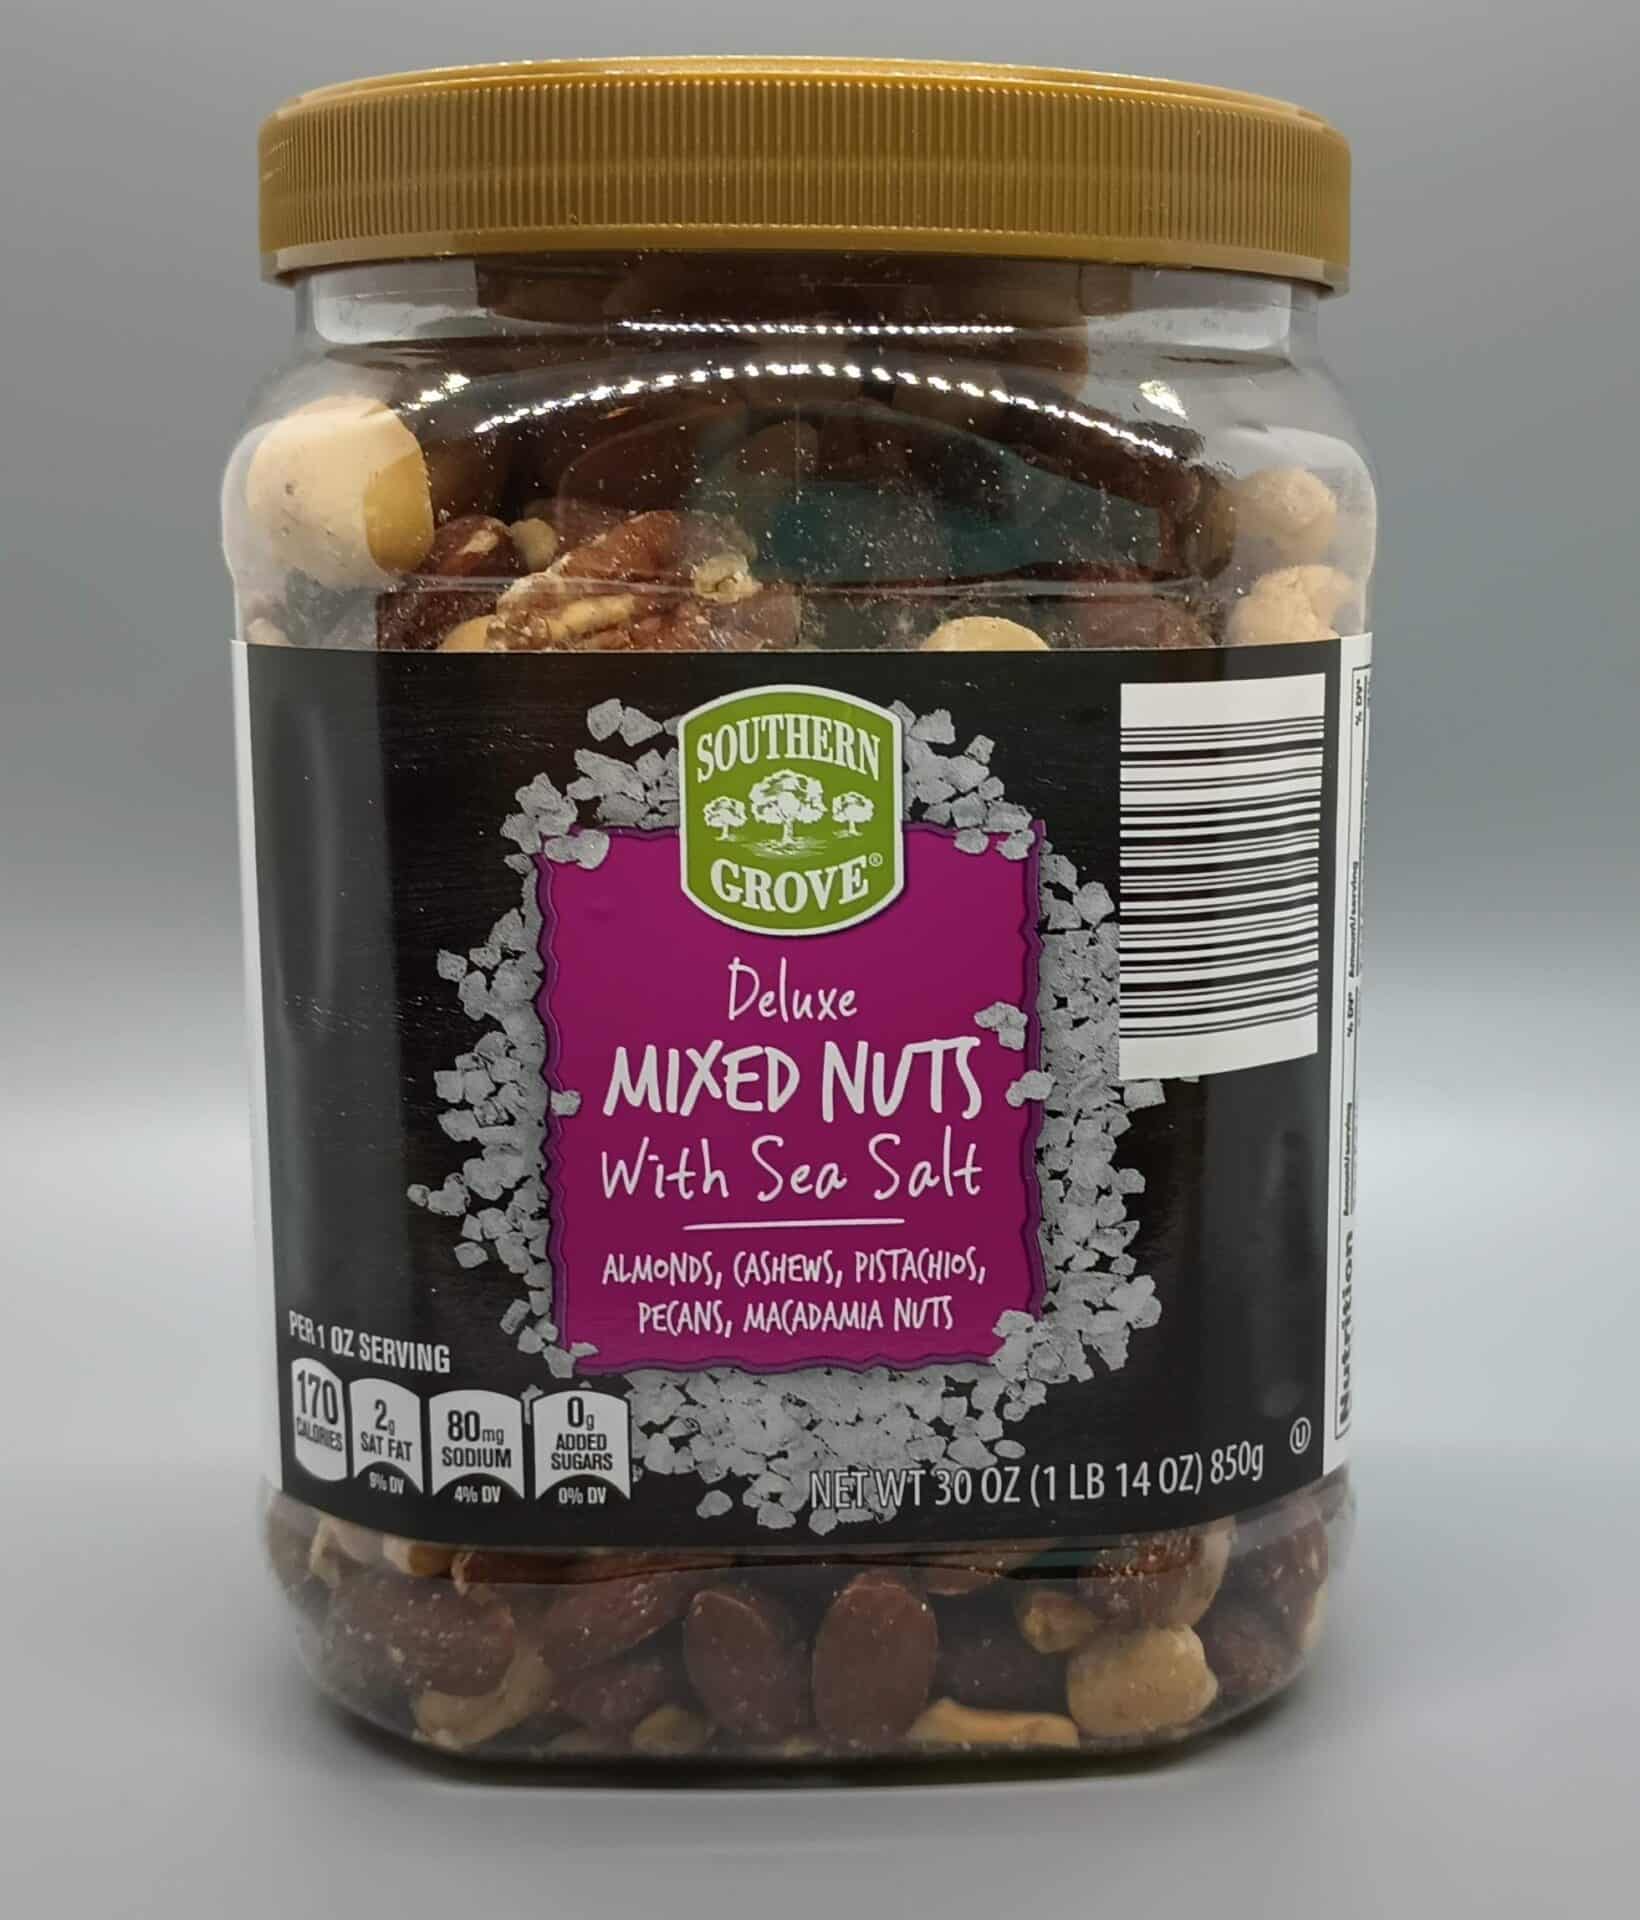 Southern Grove Deluxe Mixed Nuts with Sea Salt